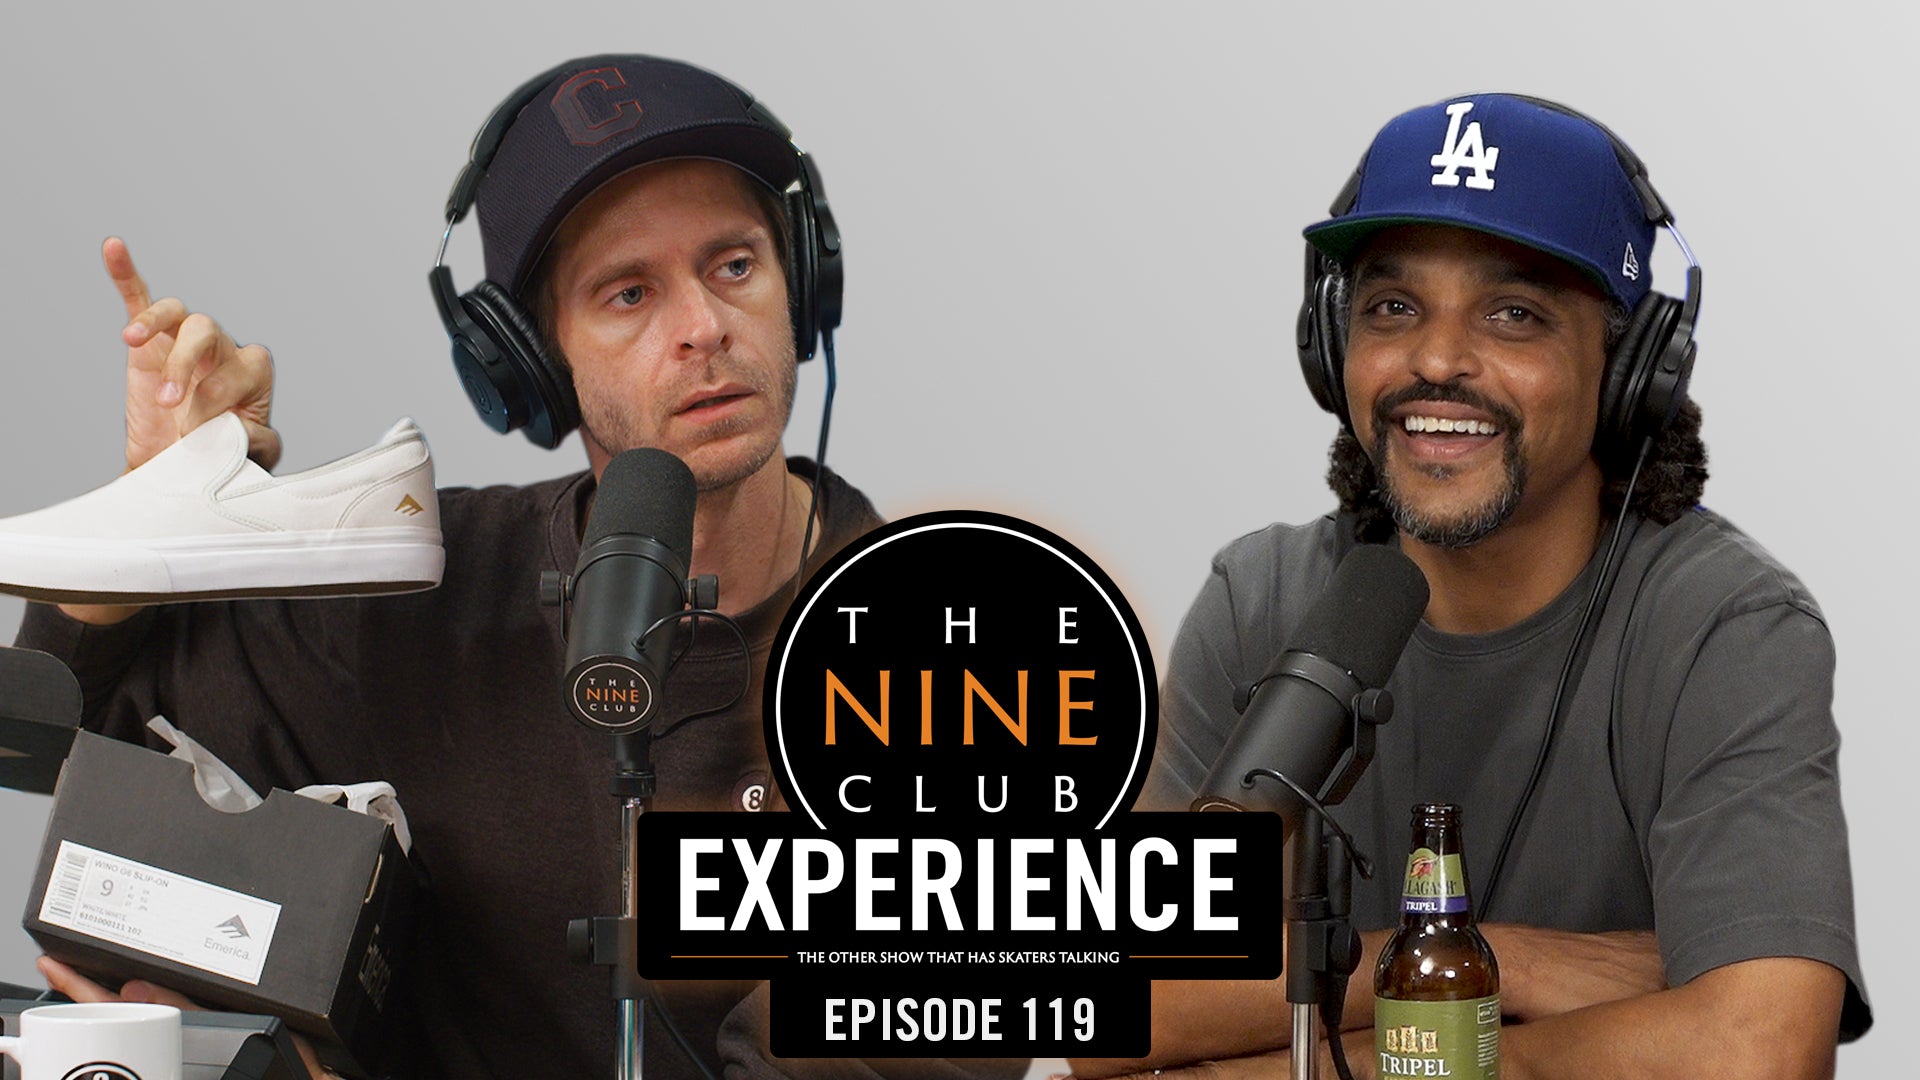 The Nine Club Experience Episode 119